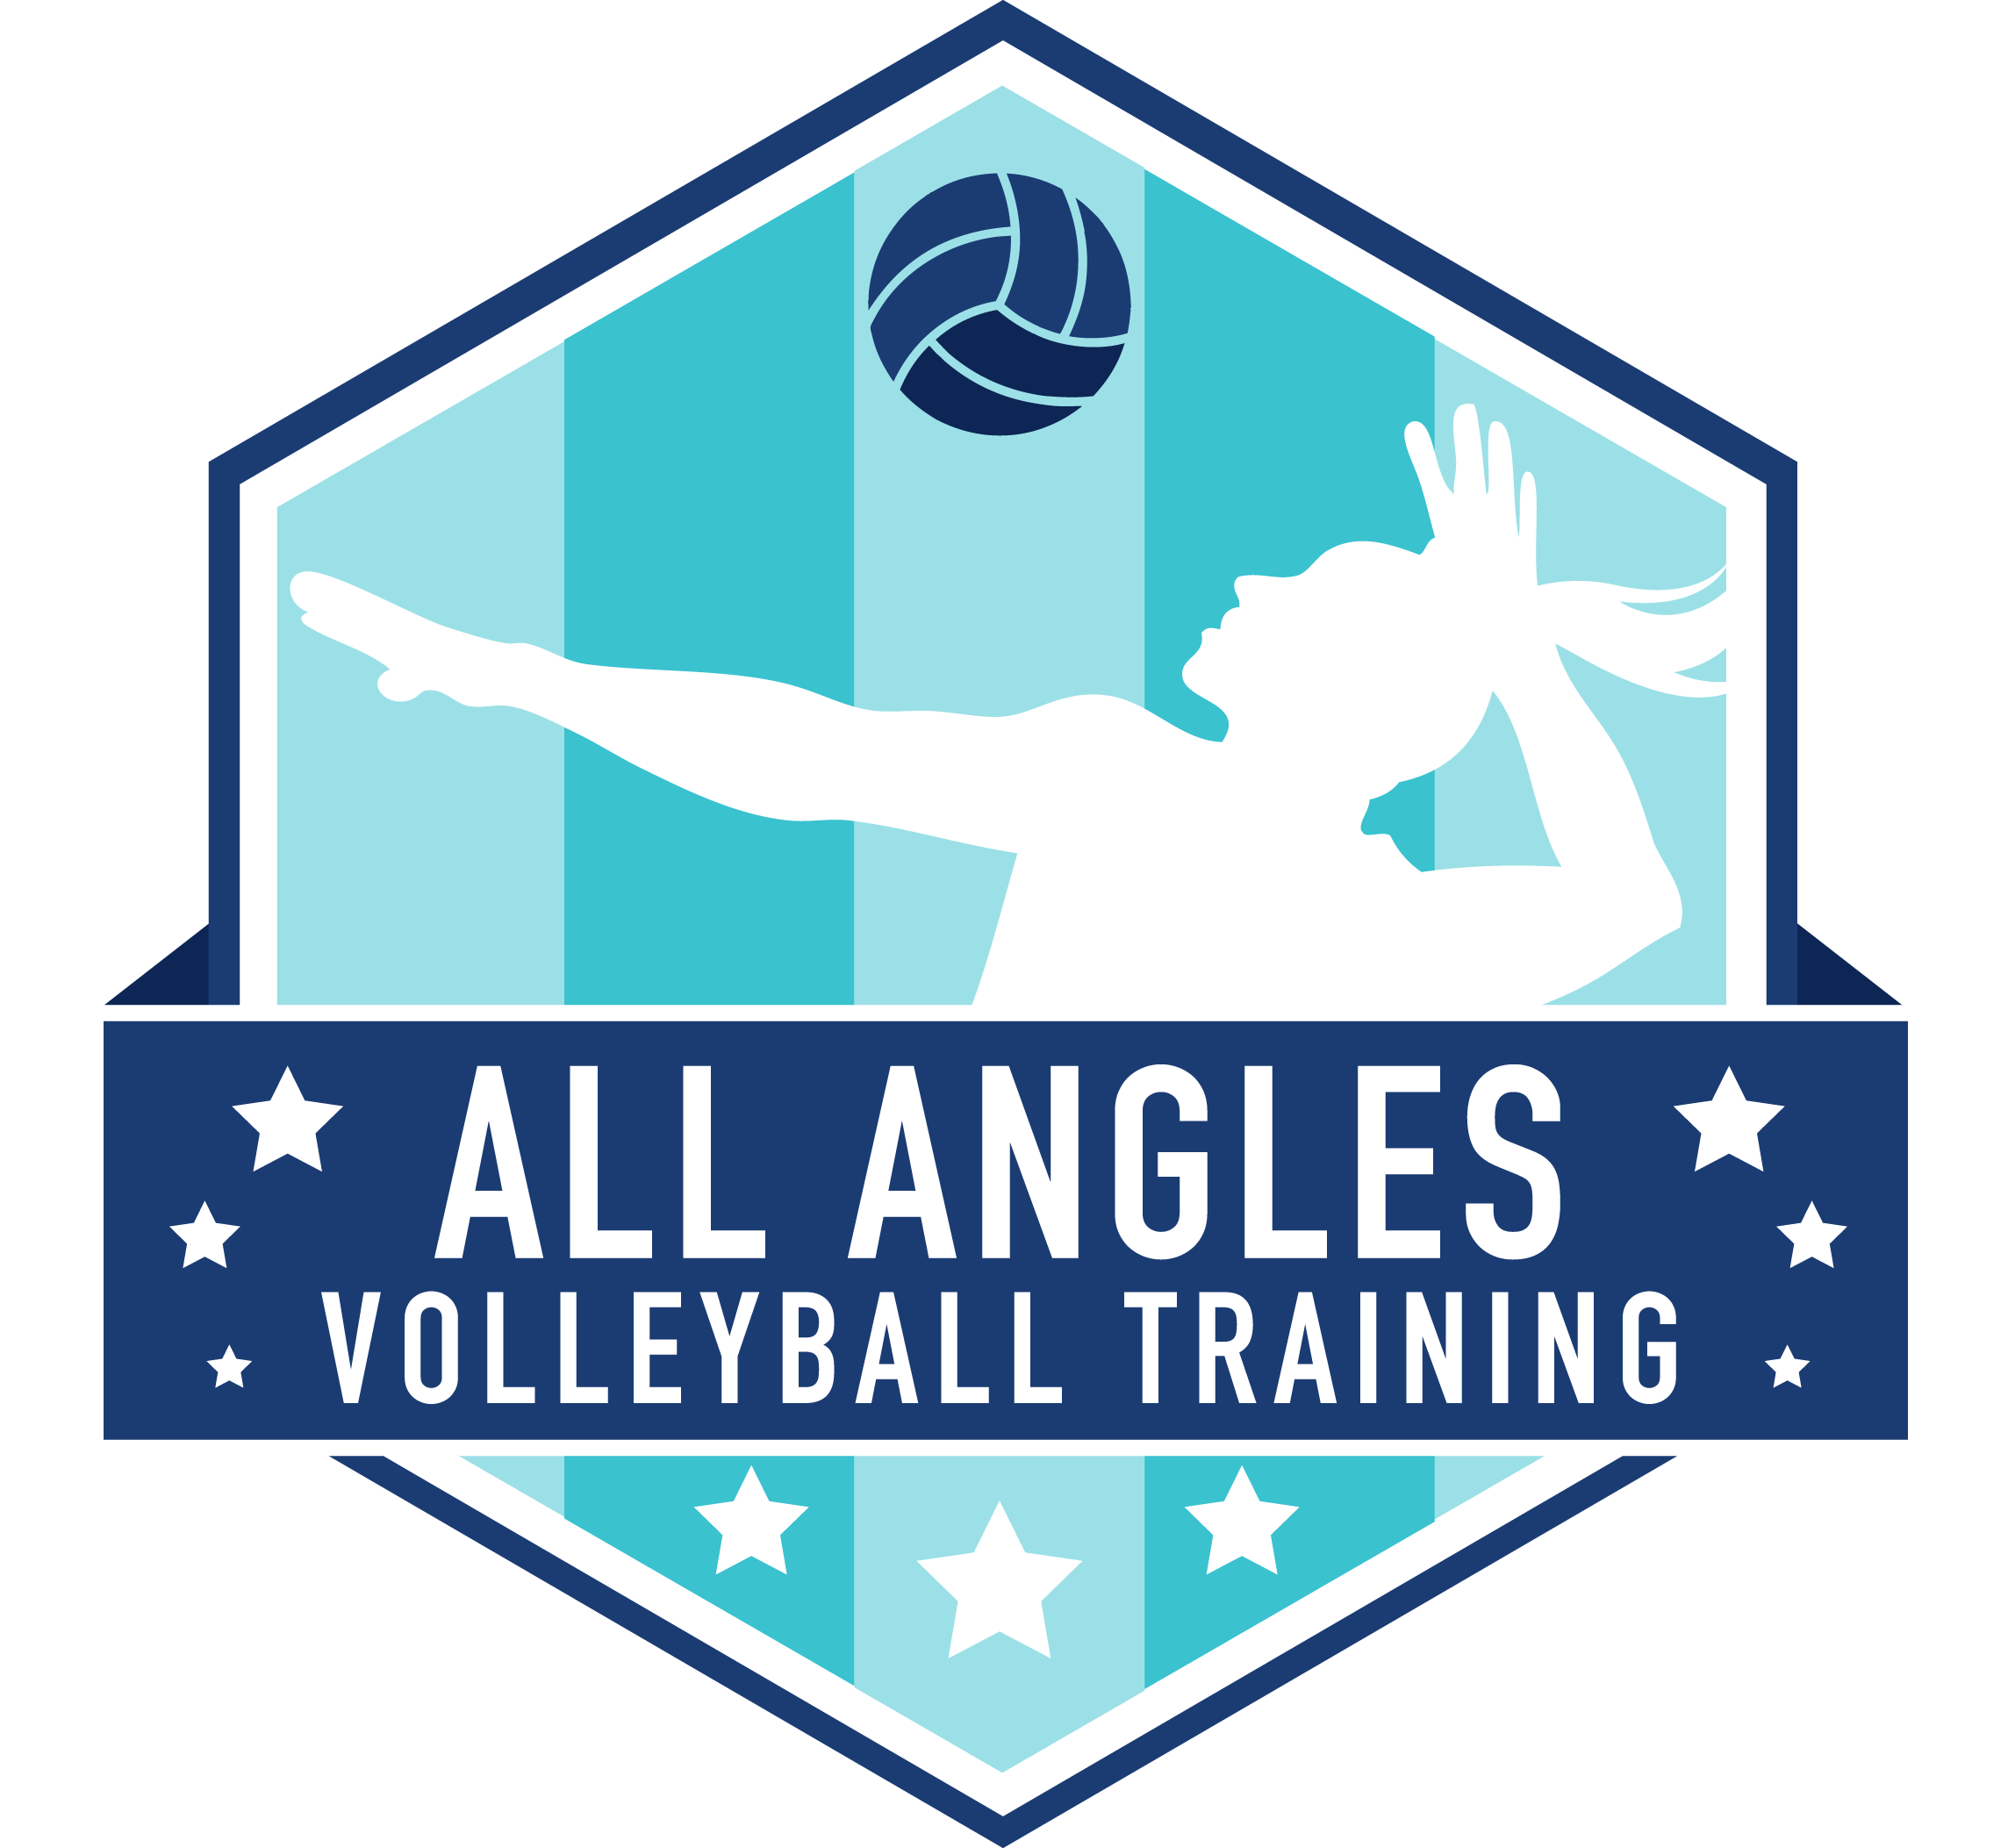 All Angles Volleyball Training